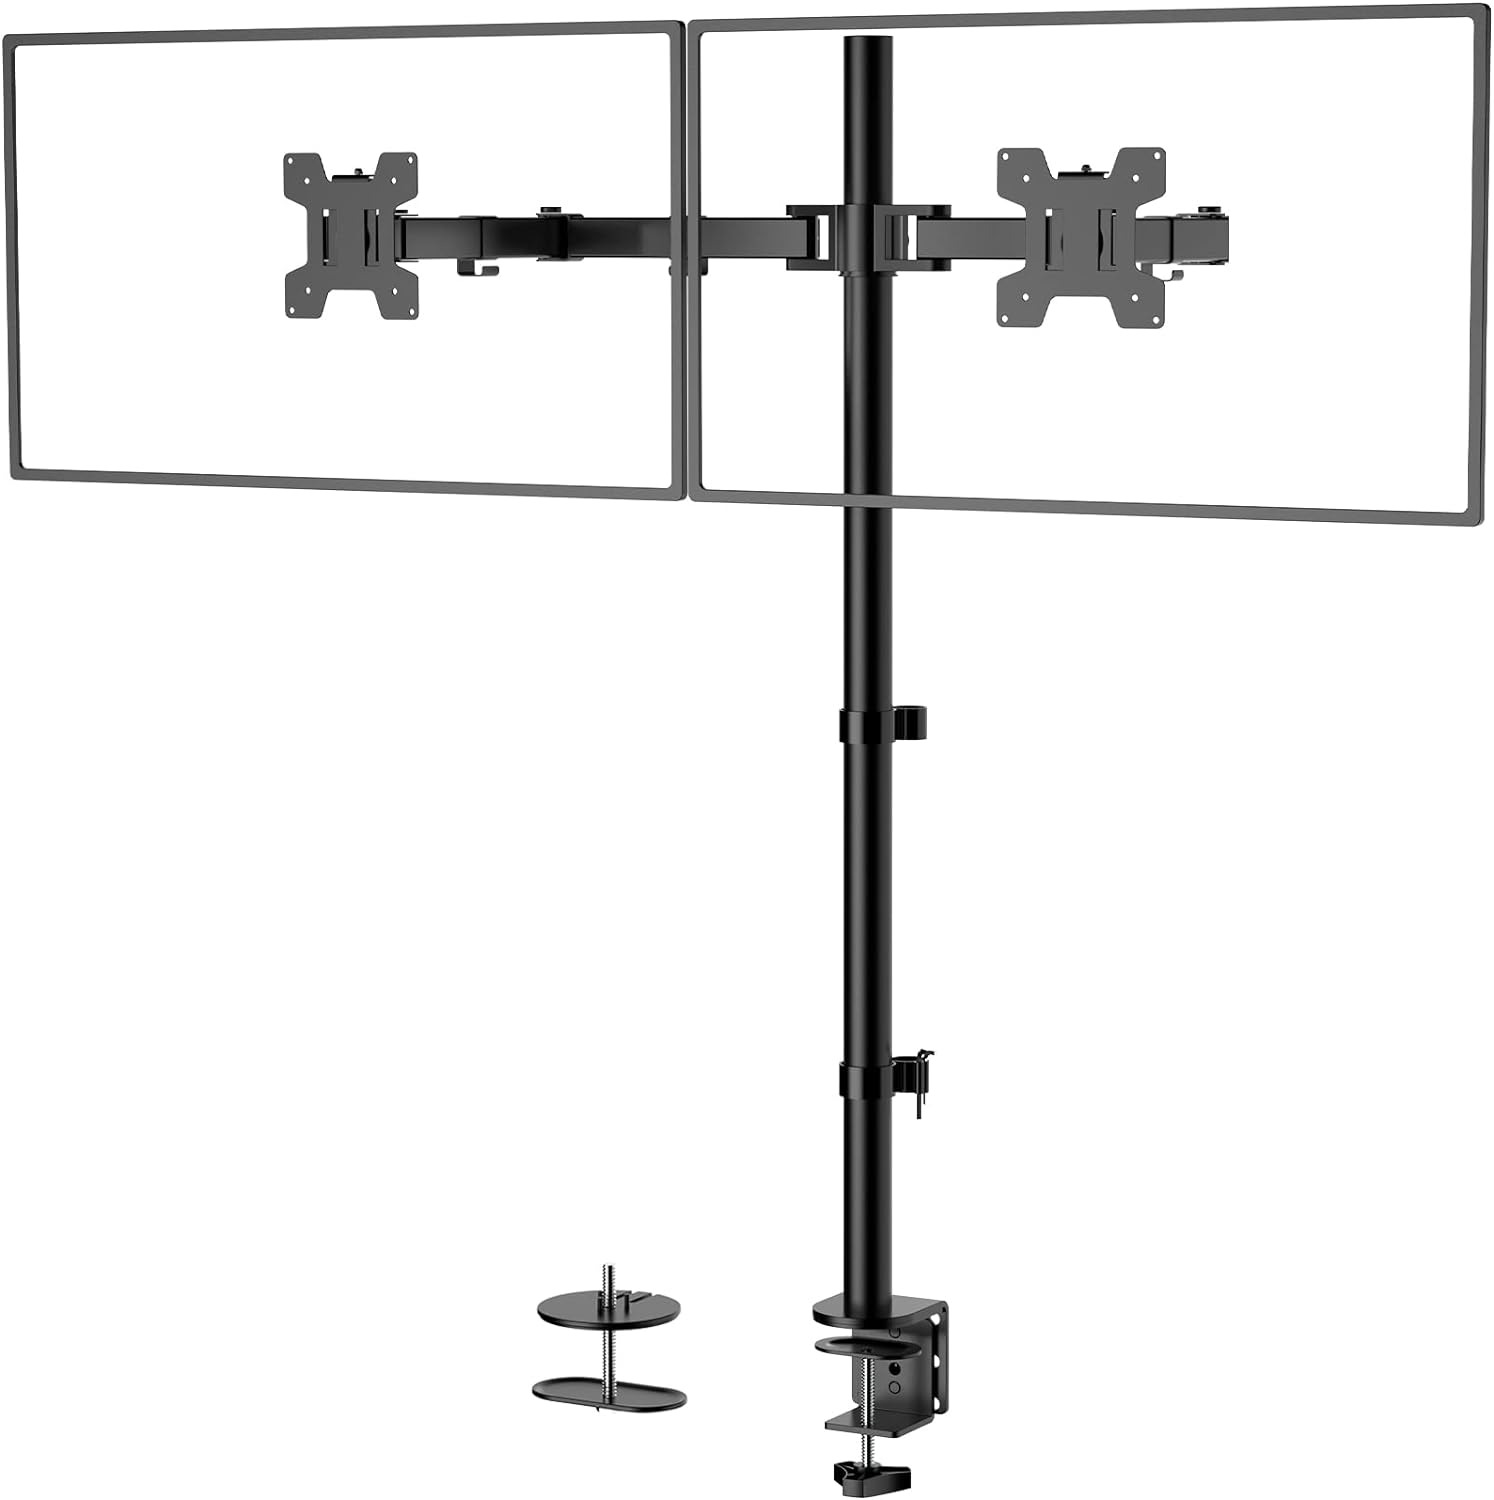 WALI Extra Tall Dual LCD Monitor Fully Adjustable Desk Mount Fits 2 Screens up t